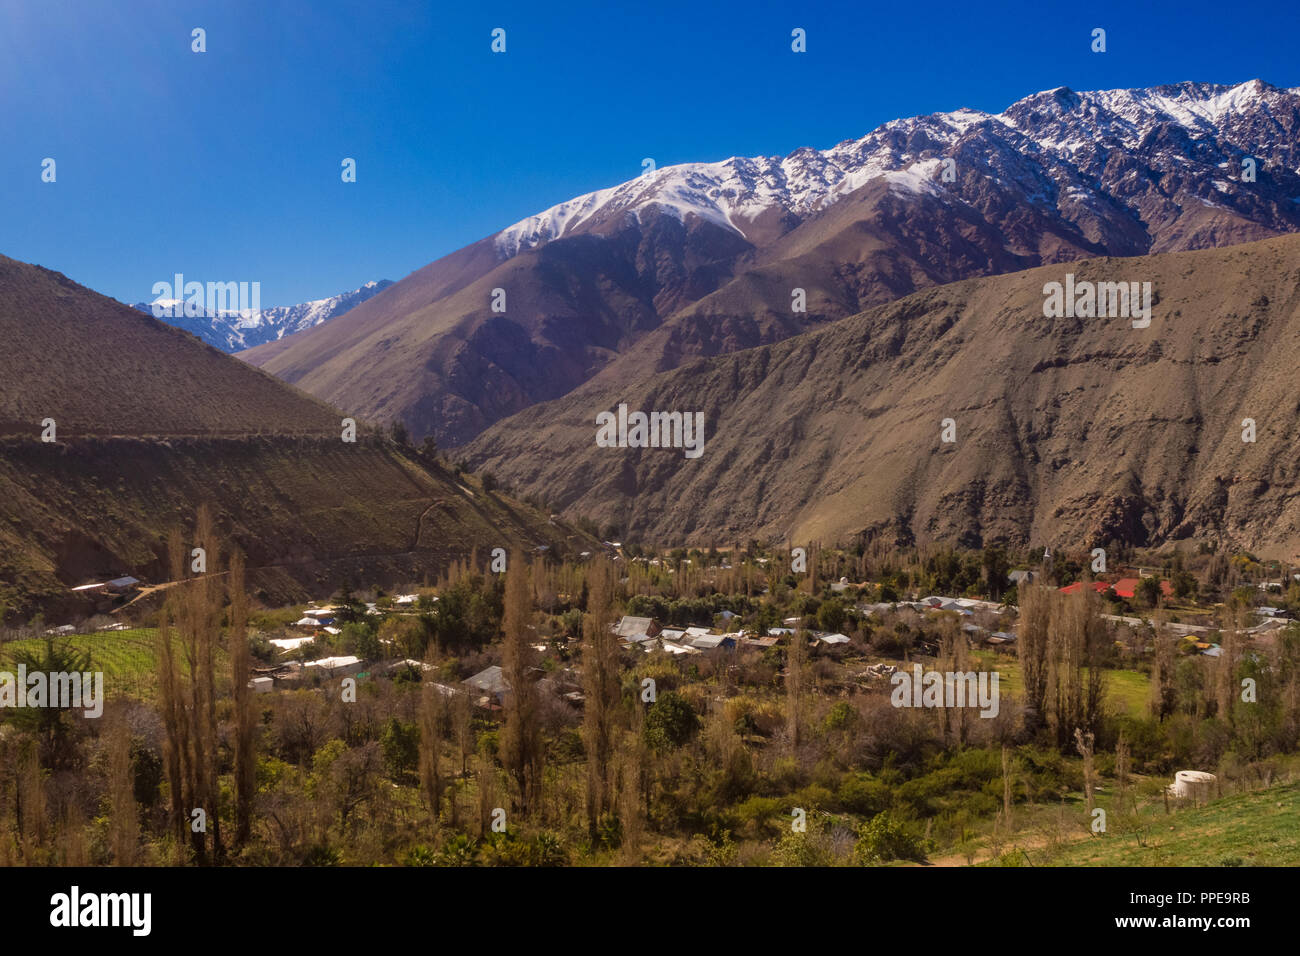 View of the Andes mountain range as seen from the Elqui Valley in Chile Stock Photo